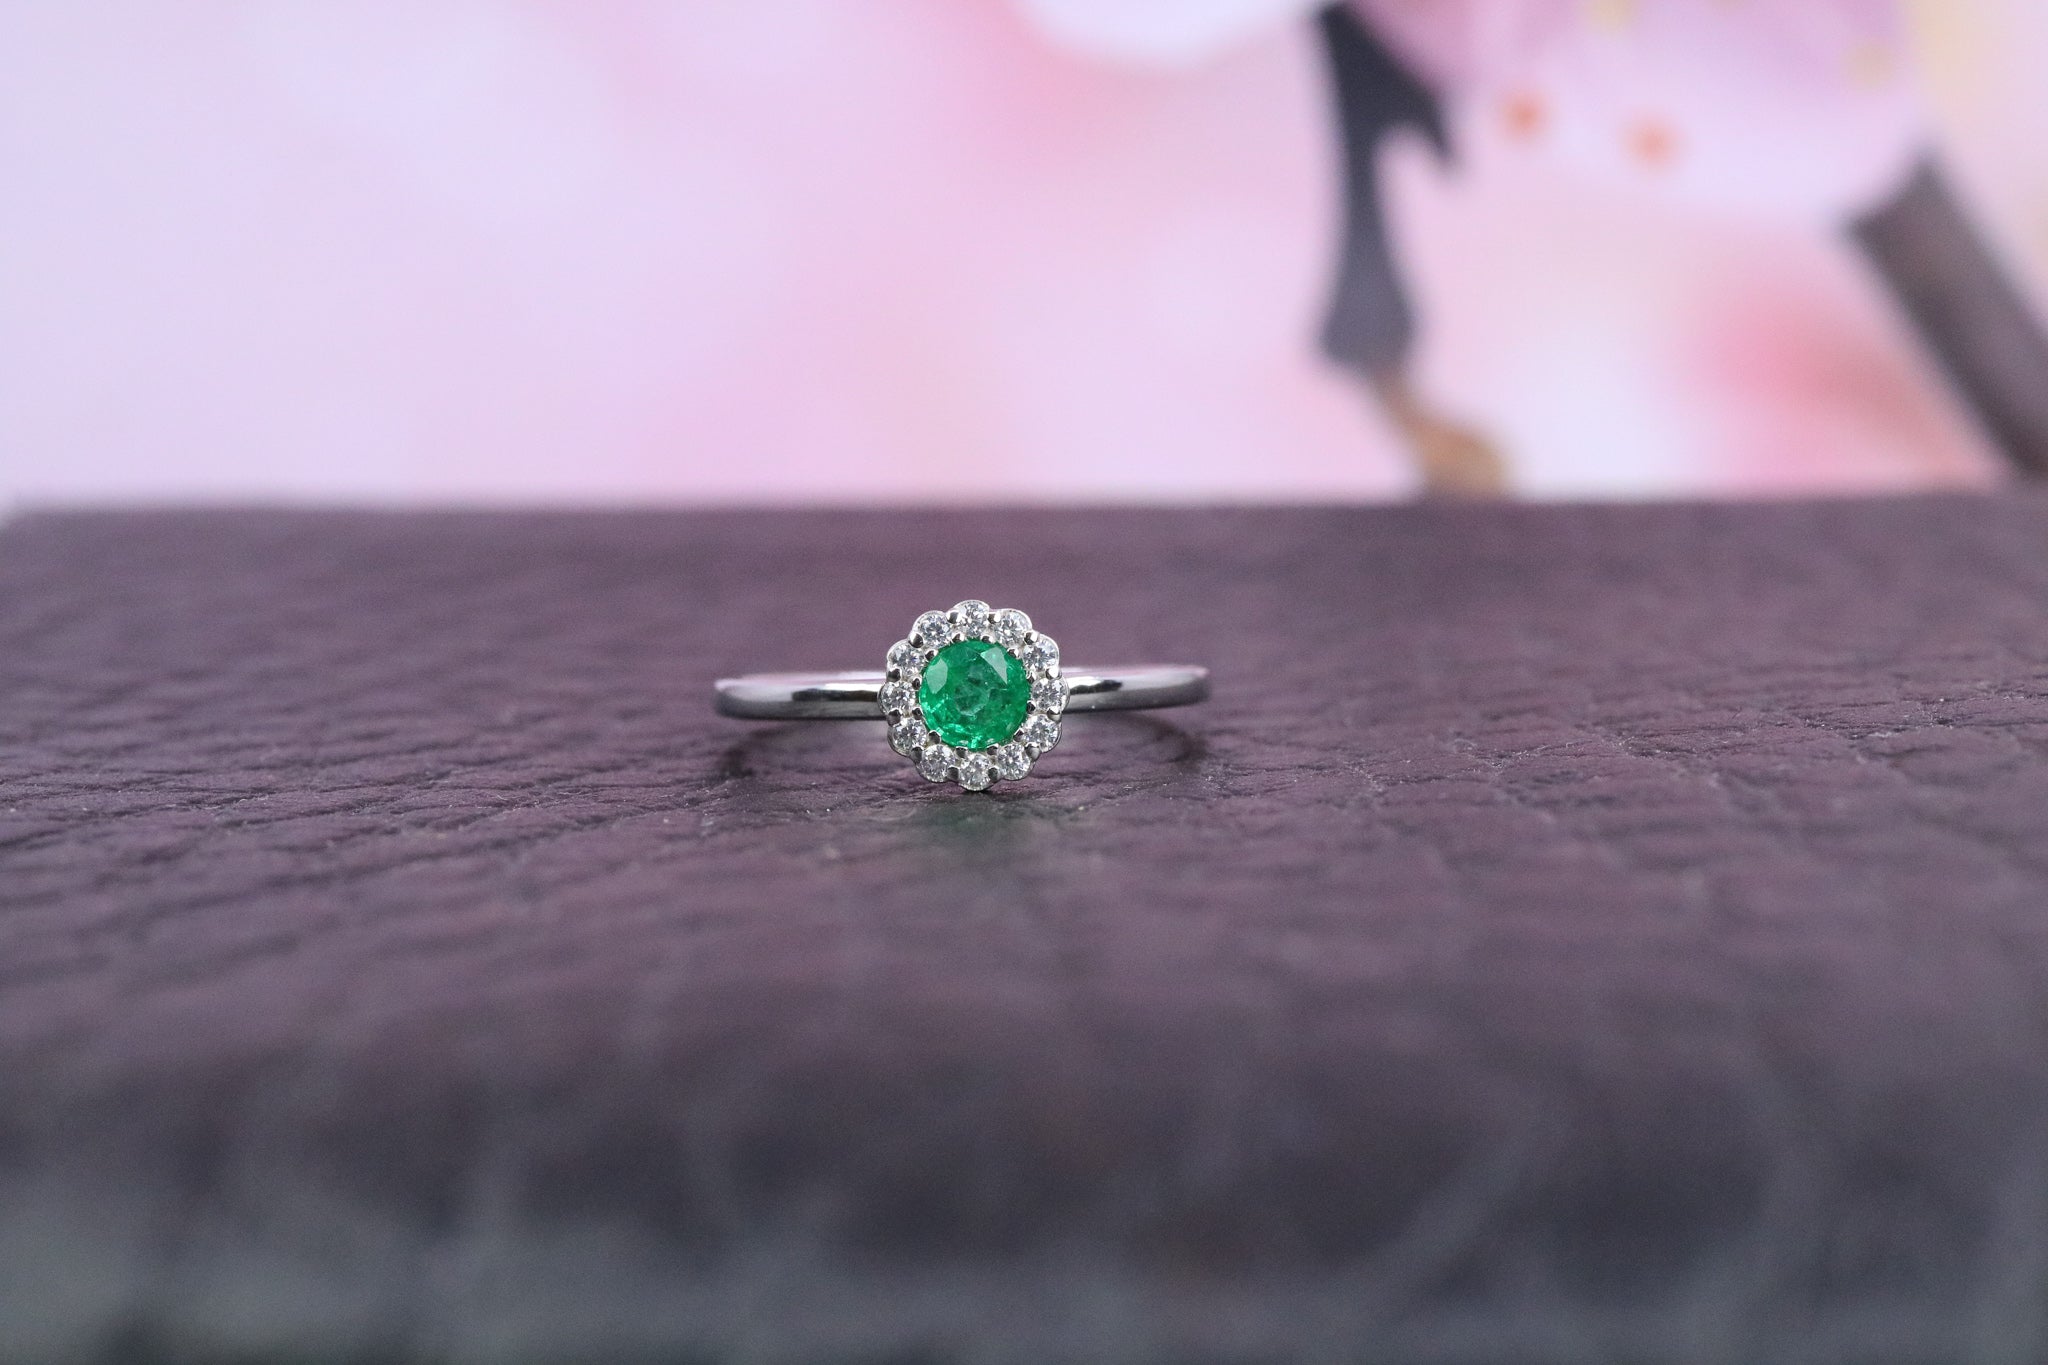 Sterling Silver & May Birthstone Ring - AK1104 - Hallmark Jewellers Formby & The Jewellers Bench Widnes